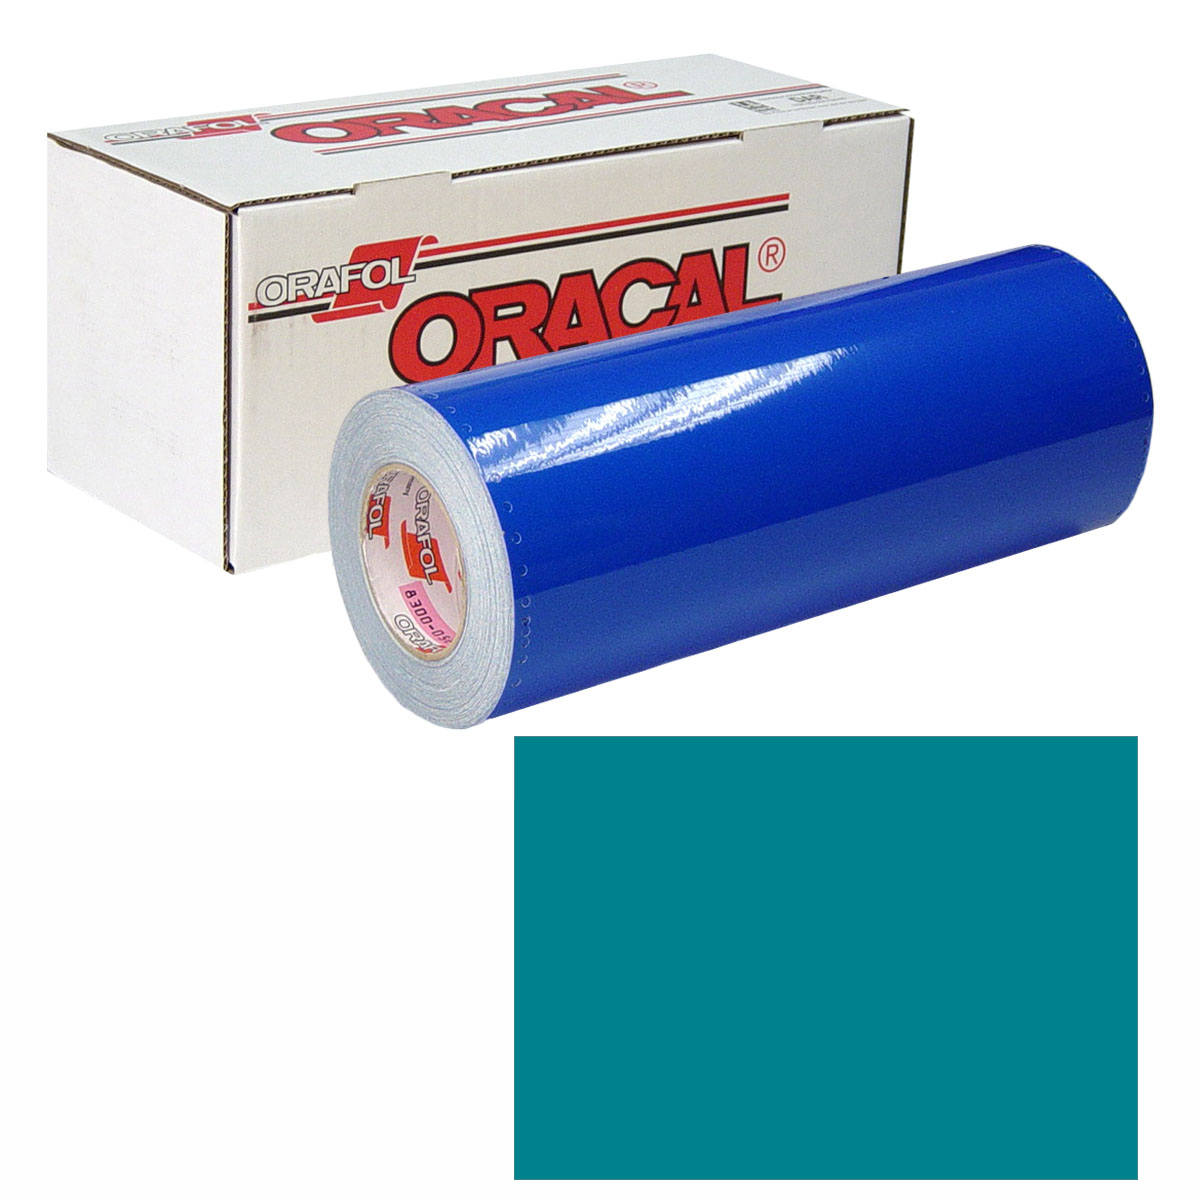 ORACAL 631 15in X 50yd 066 Turquoise Blue